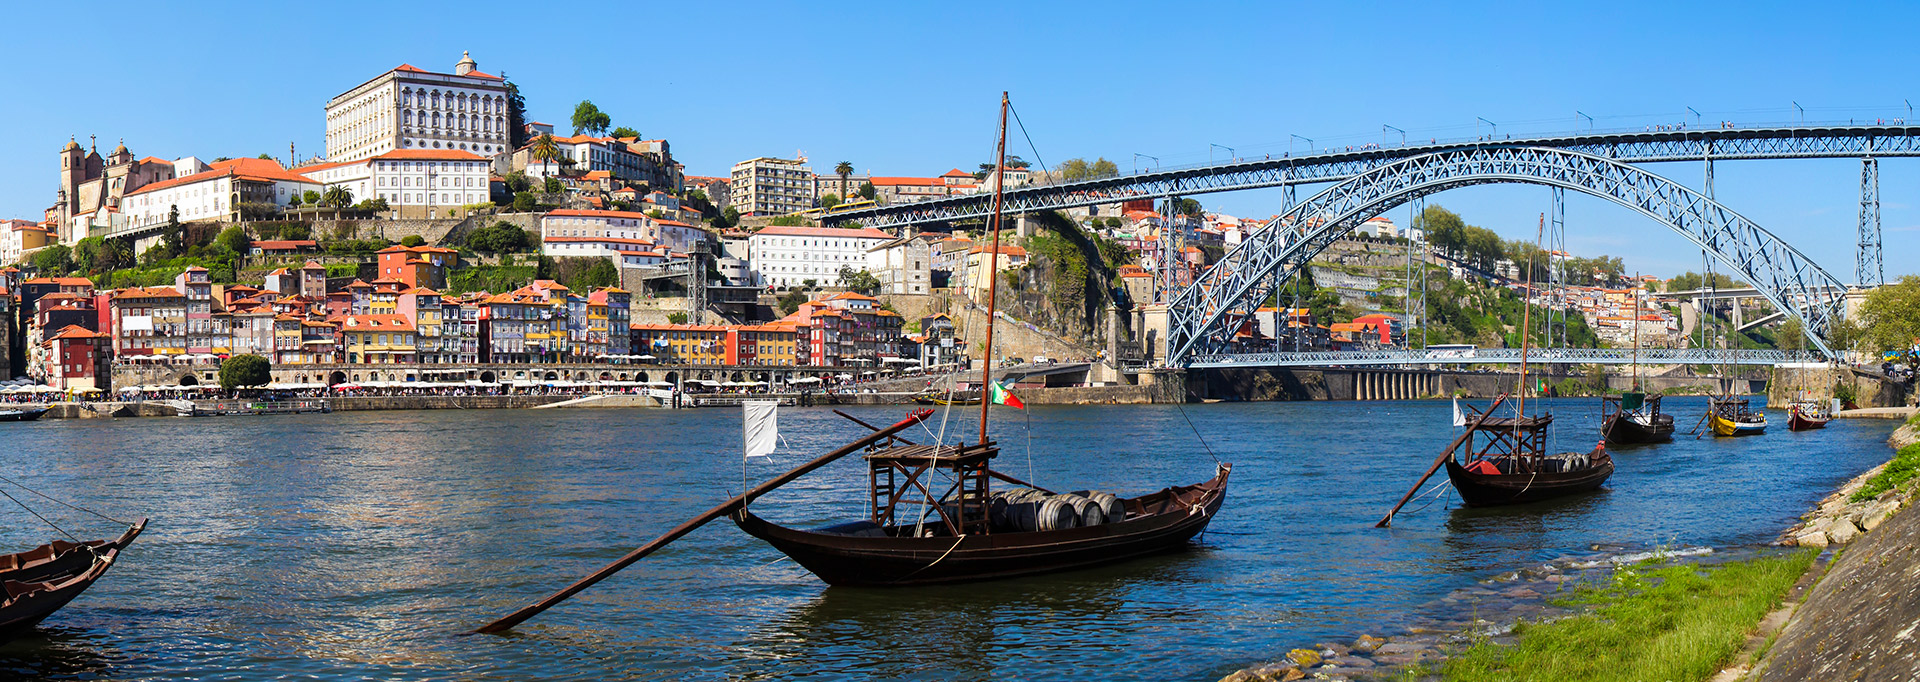 8 Day Douro Valley River Cruise Holiday - Travelsphere